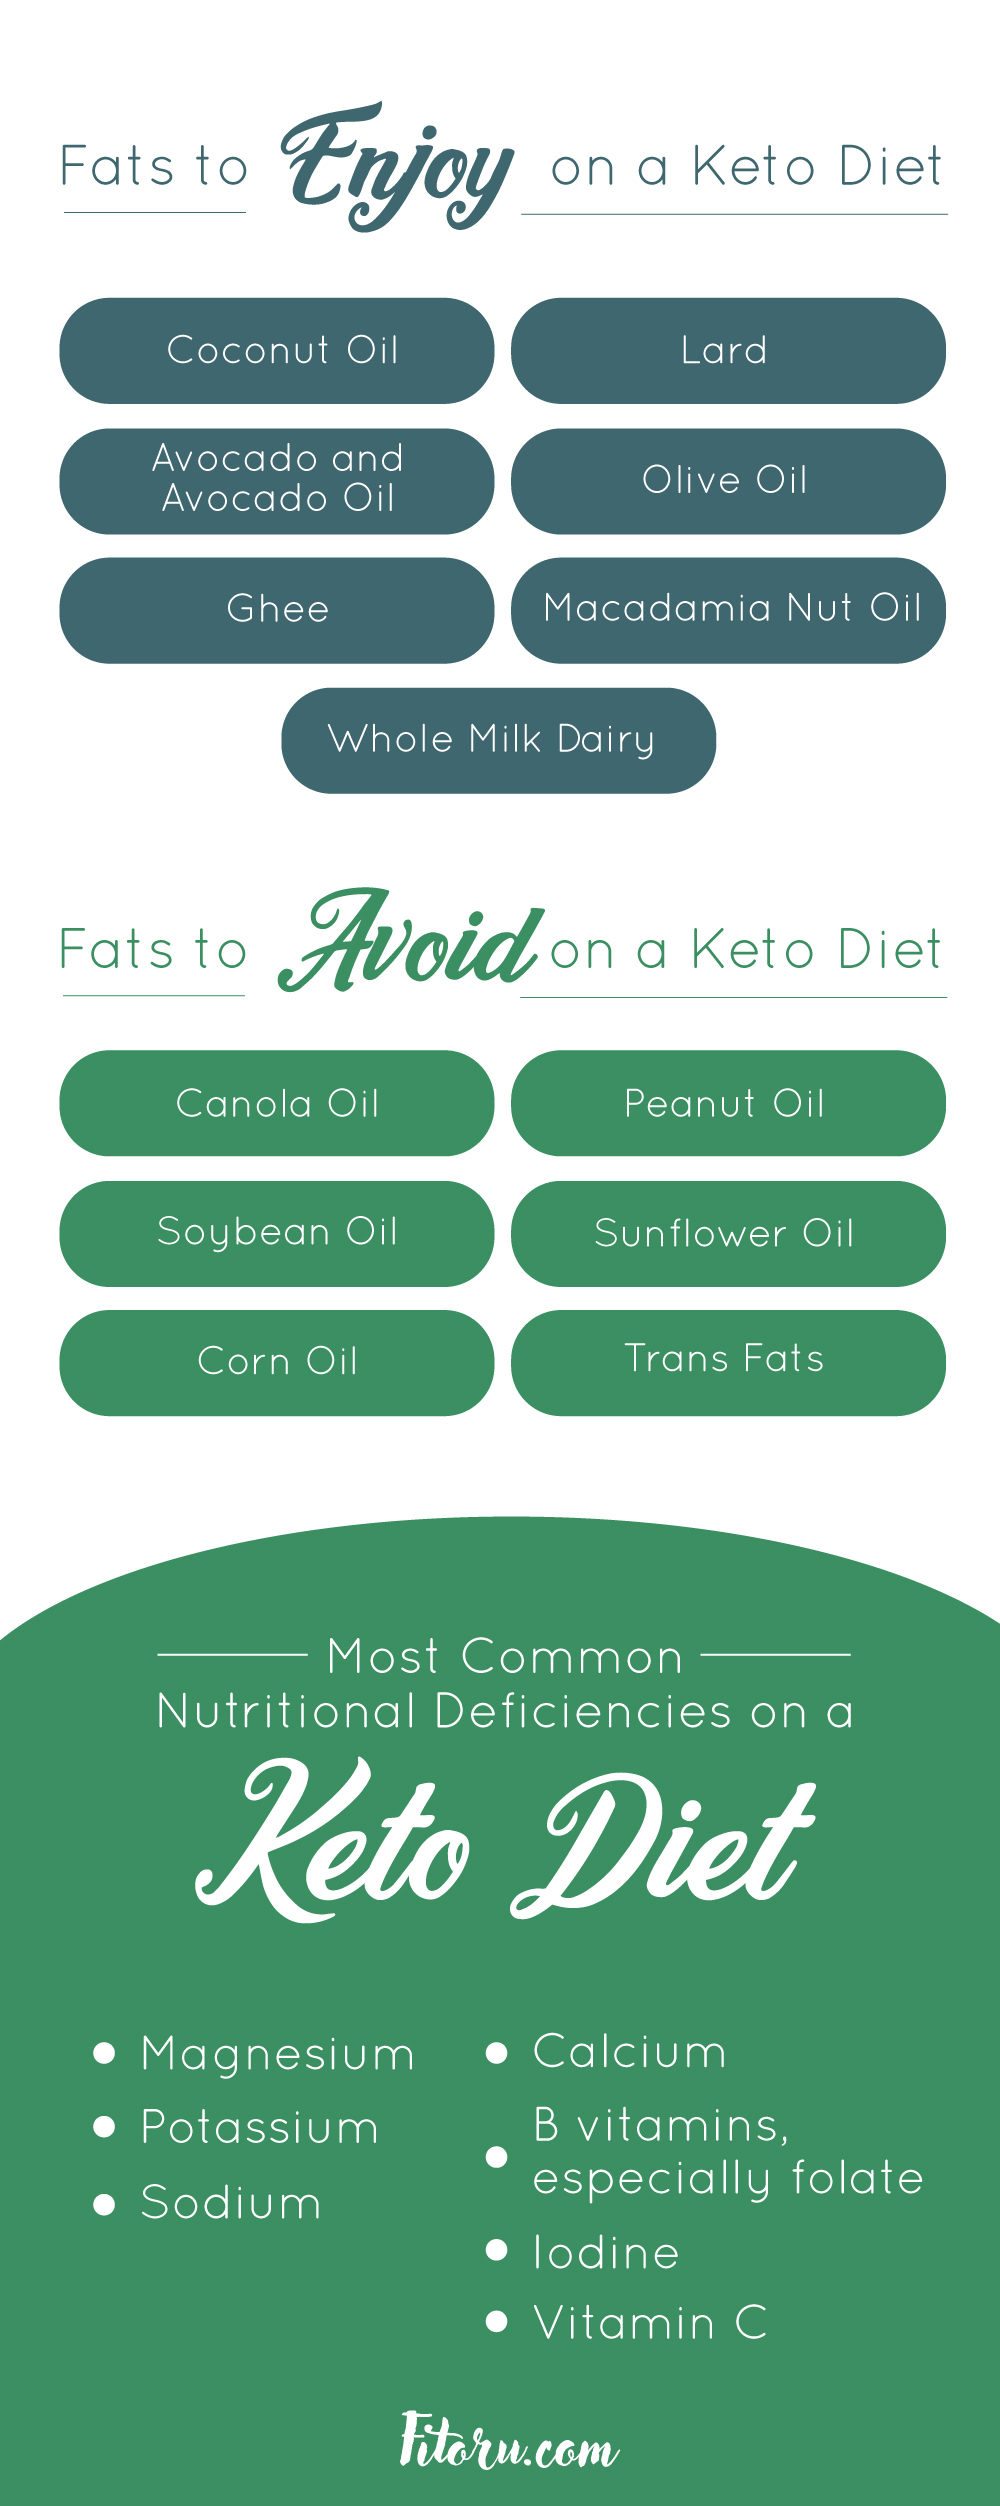 Is the keto diet dangerous or safe?